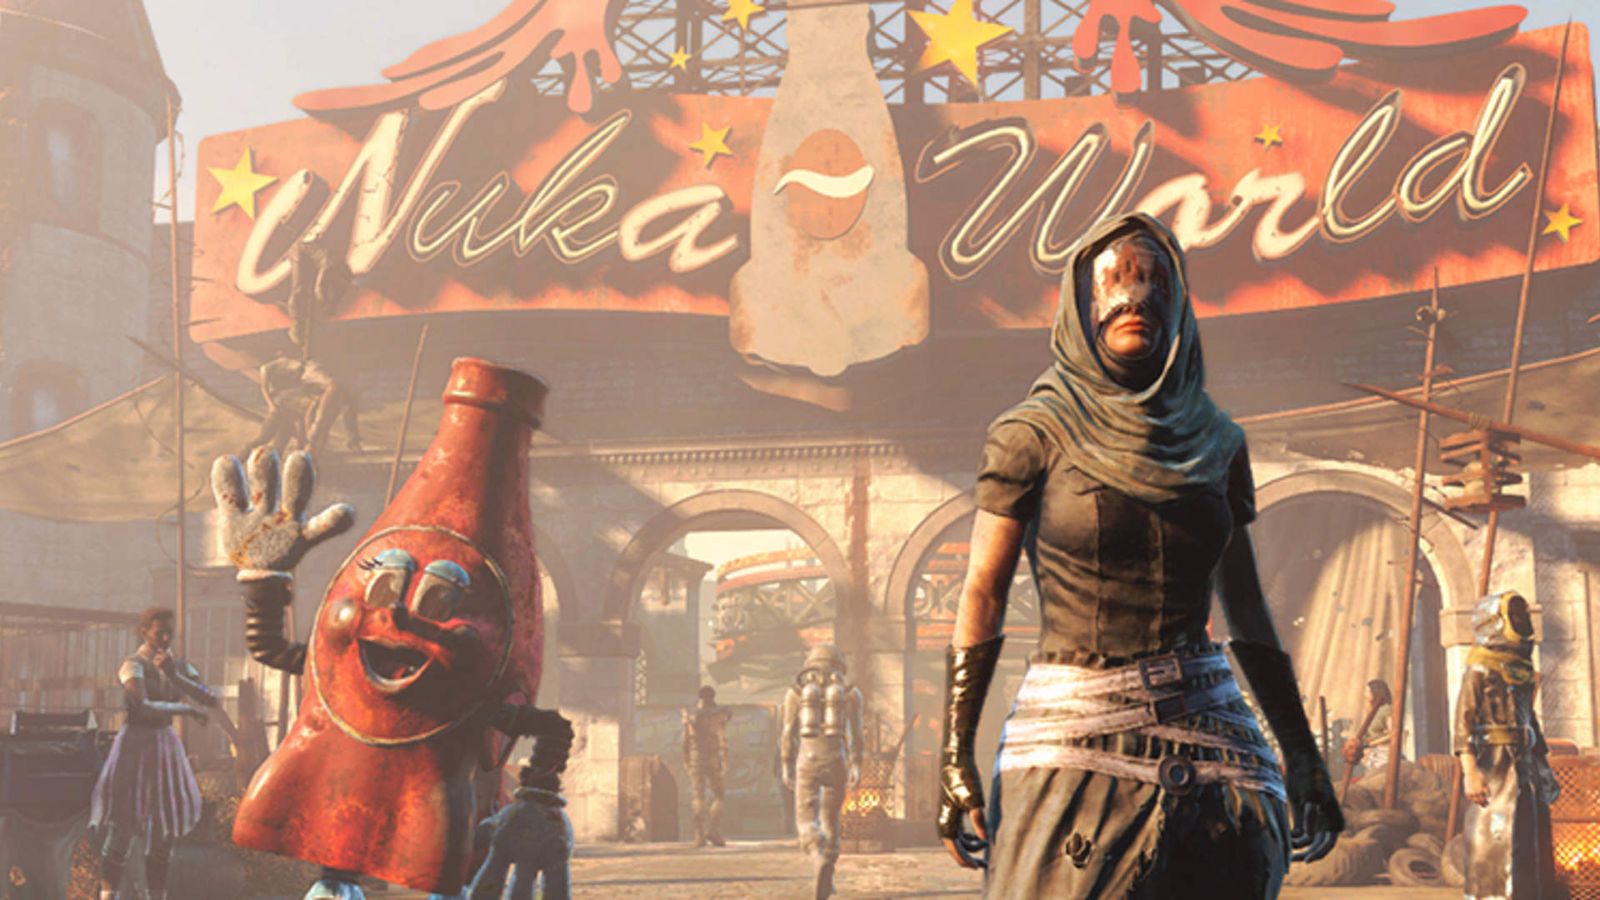 NUKA WORLD! Fallout 4 would be a great addition to the roster!